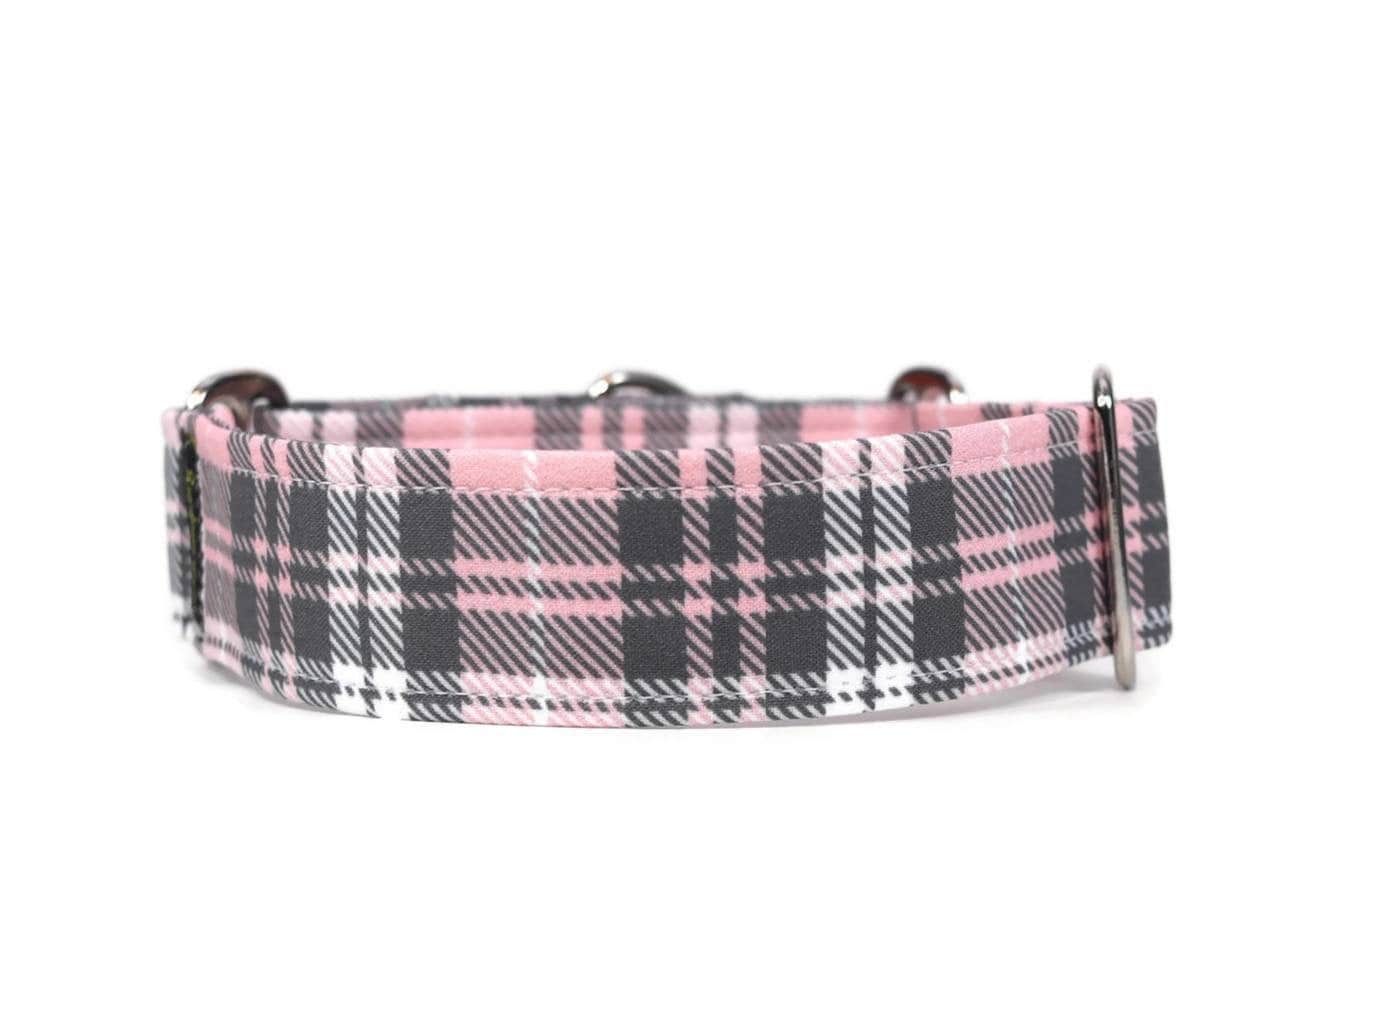 Unlined Furberry Plaid Buckle or Martingale Dog Collar by Dog Star